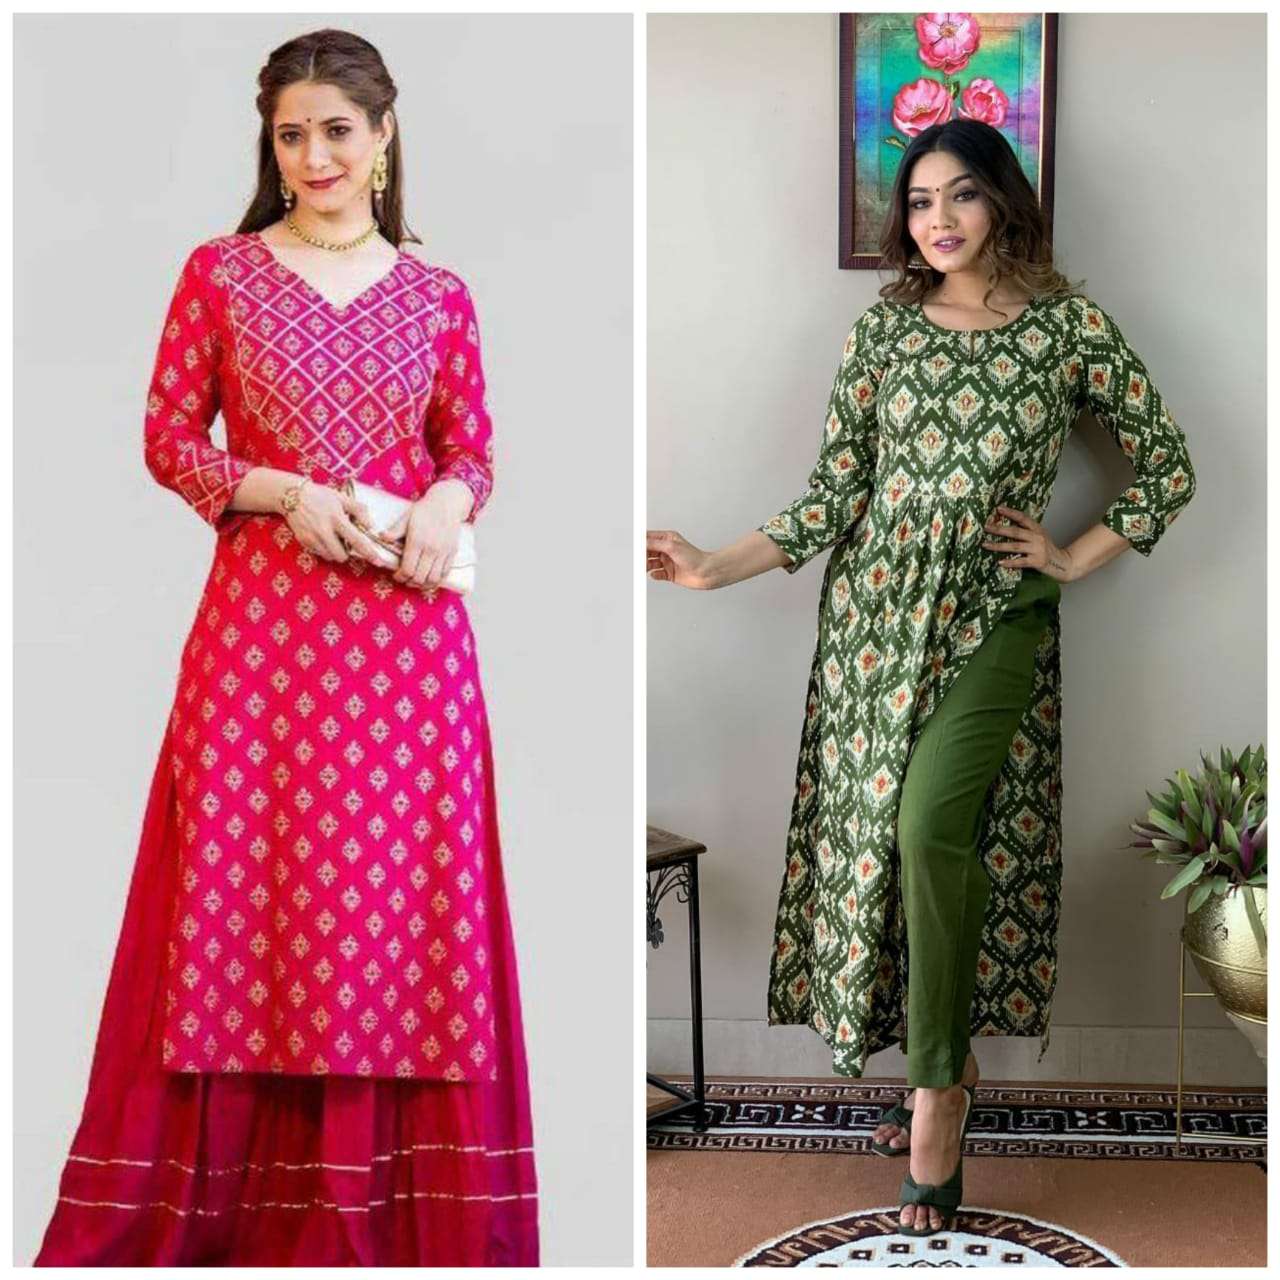 raksha bandhan dhamaka combo offer best combo offer best rate and best quality always 2 kurtie combo in offer sale price 2 kurties combo 